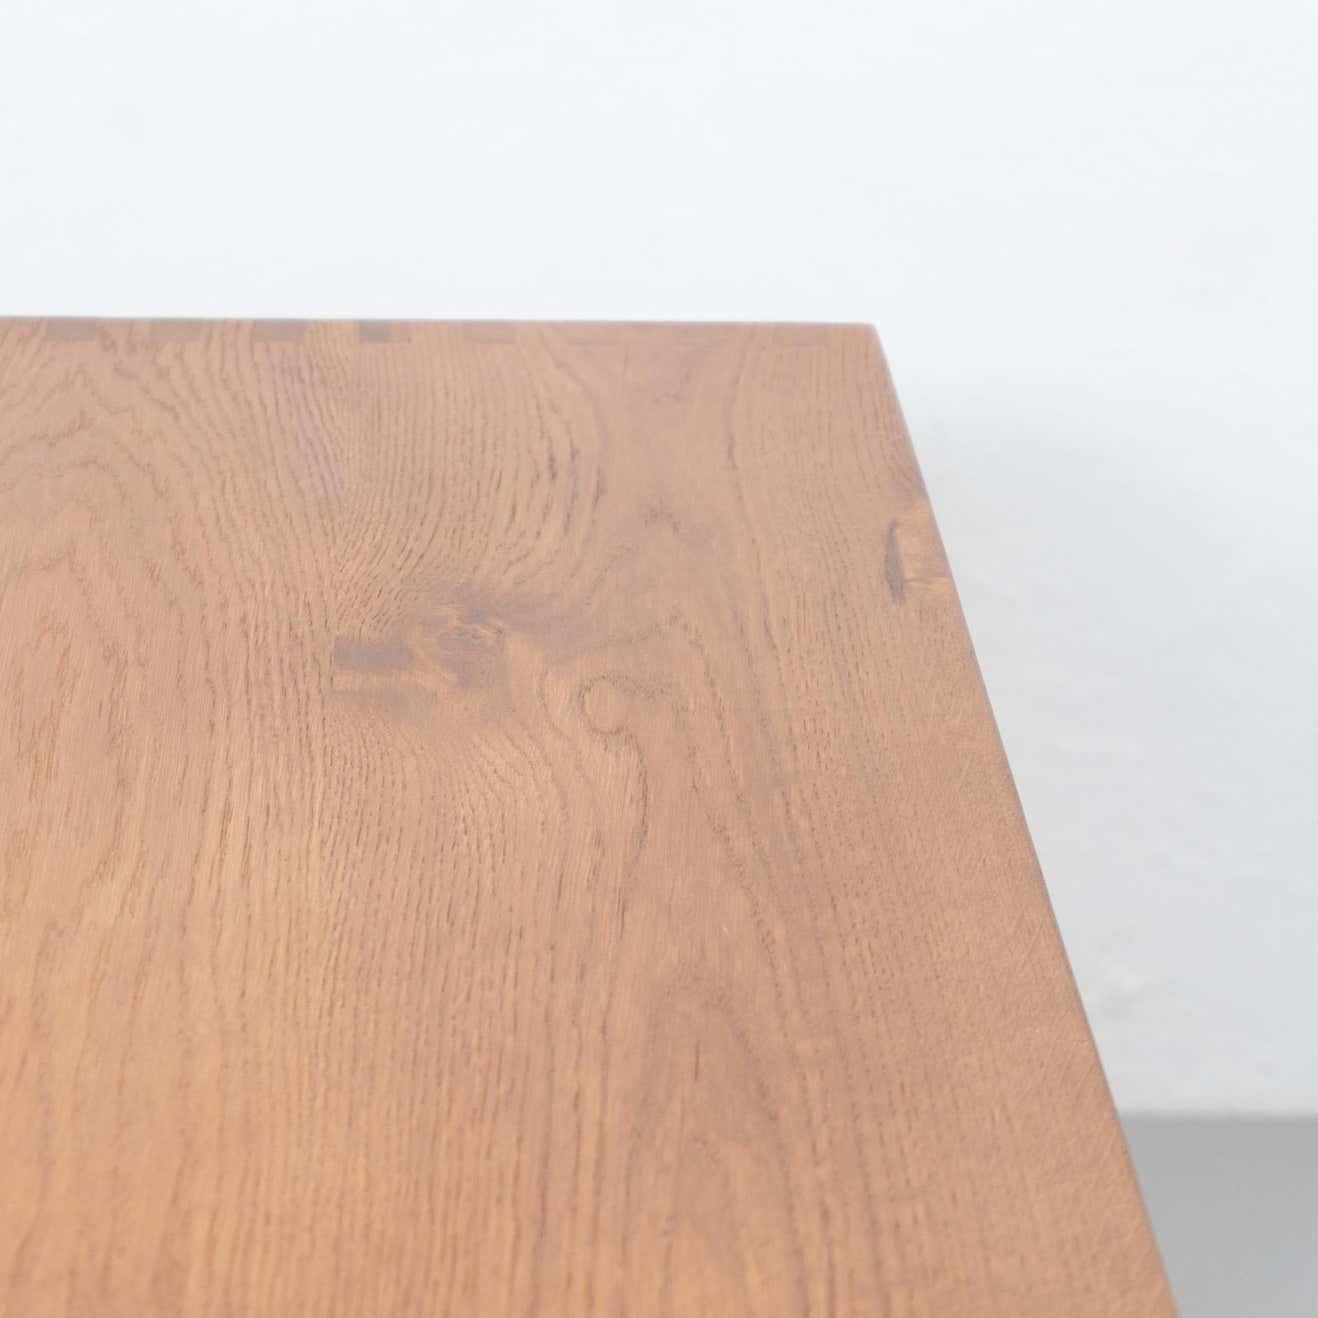 Dada Est. Contemporary Solid Oak Dining Table In Good Condition For Sale In Barcelona, Barcelona